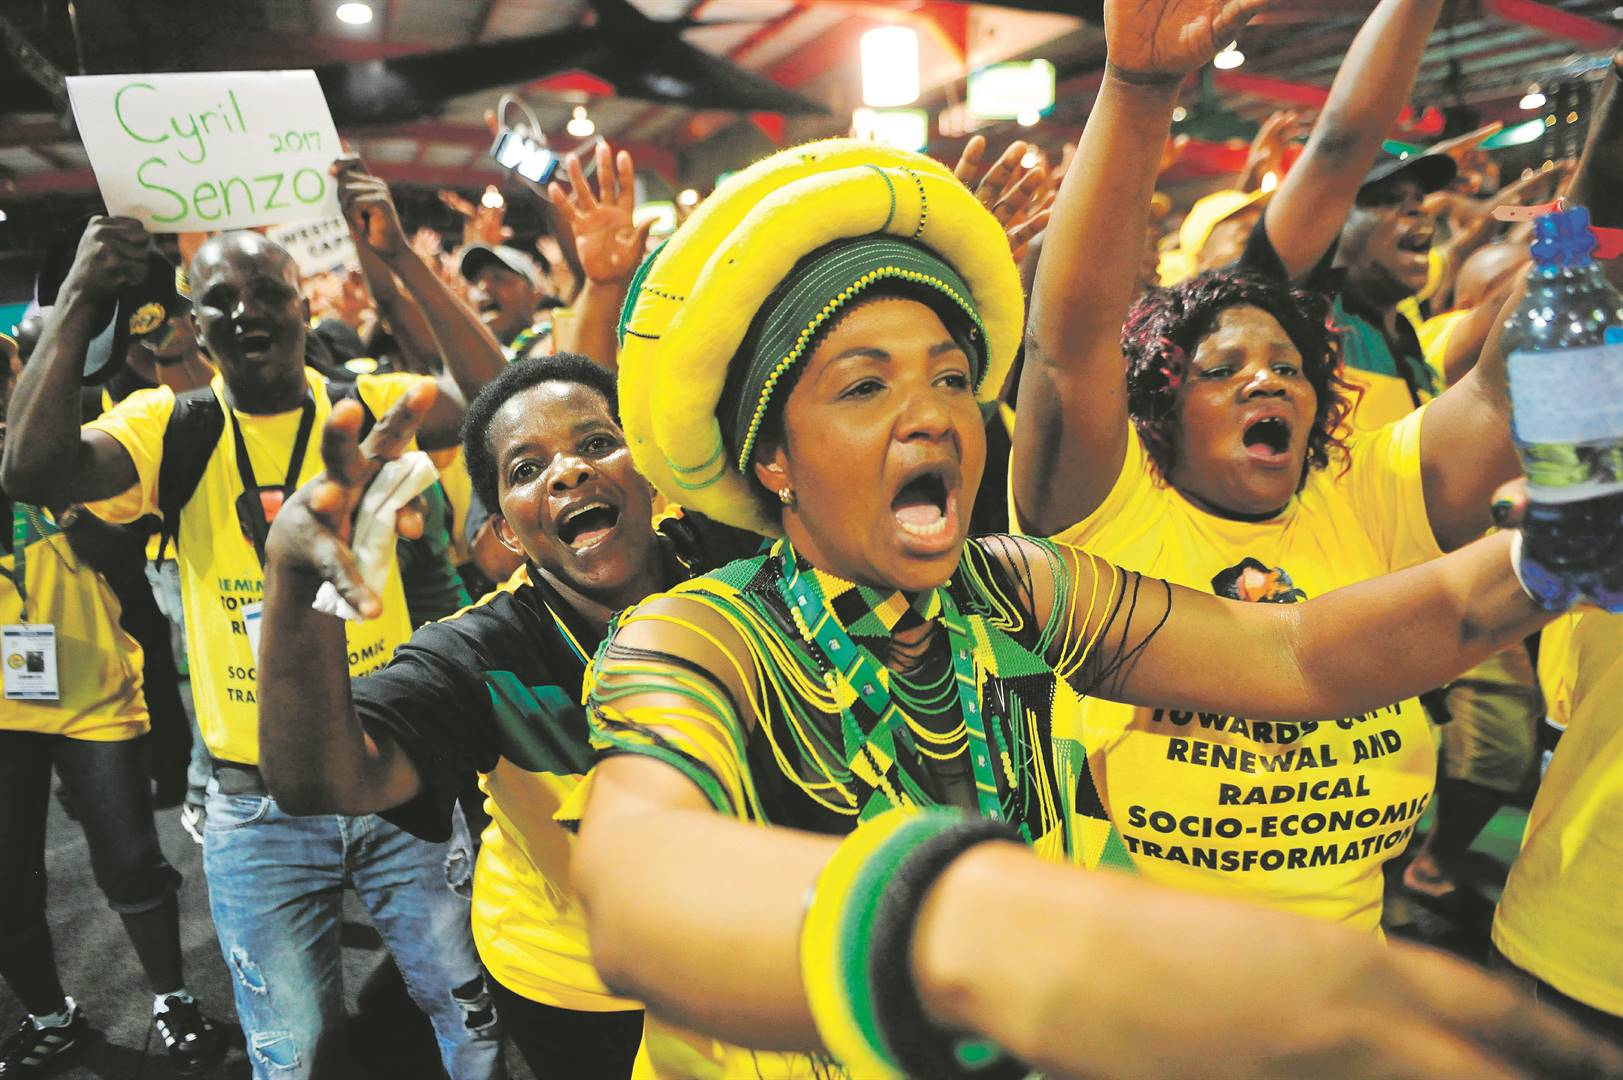 Delegates during outgoing ANC President Jacob Zuma’s final speech at the party’s 54th national elective conference at the Nasrec Expo Centre on December 16, 2017 in Johannesburg, South Africa. In his speech‚ Zuma reminded the ANC of the journey it had taken in 2017‚ remembering the longest-serving president of the ANC‚ Oliver Reginald Tambo. Picture: Gallo Images / Sowetan / Veli Nhlapo